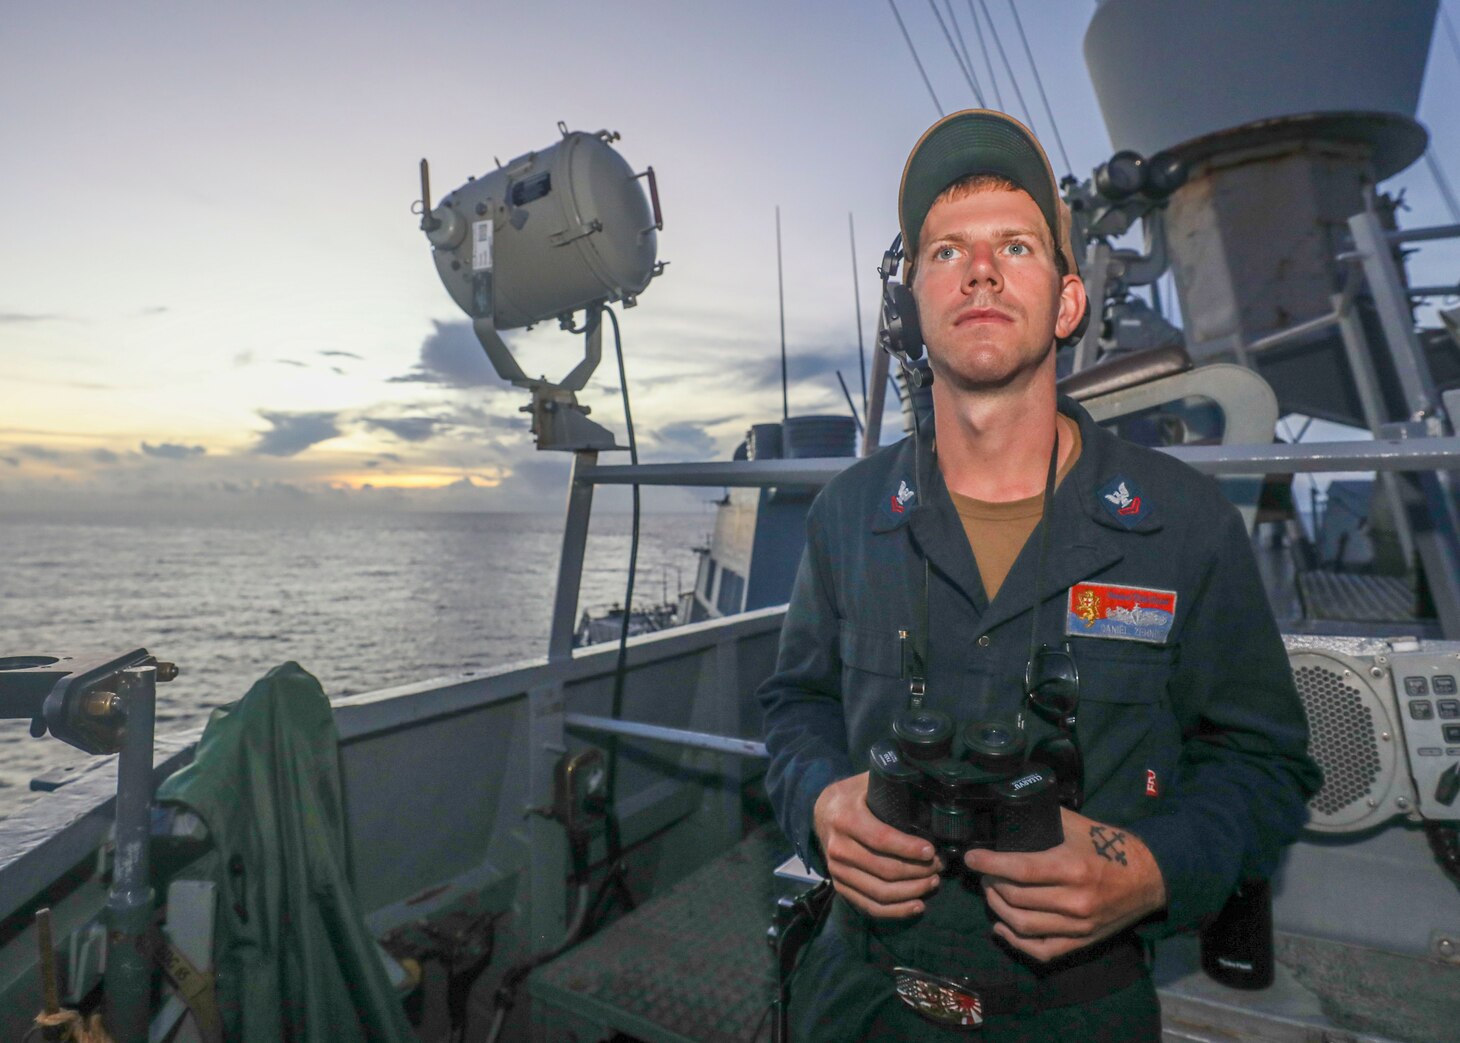 SOUTH CHINA SEA (July 13, 2022) Boatswain’s Mate 2nd Class Daniel Zehder, from Dayton, Ohio, stands lookout watch on the bridgewing as the guided-missile destroyer USS Benfold (DDG 65) conducts routine underway operations. Benfold is forward-deployed to the U.S. 7th Fleet area of operations in support of a free and open Indo-Pacific. (U.S. Navy photo by Mass Communication Specialist 2nd Class Arthur Rosen)